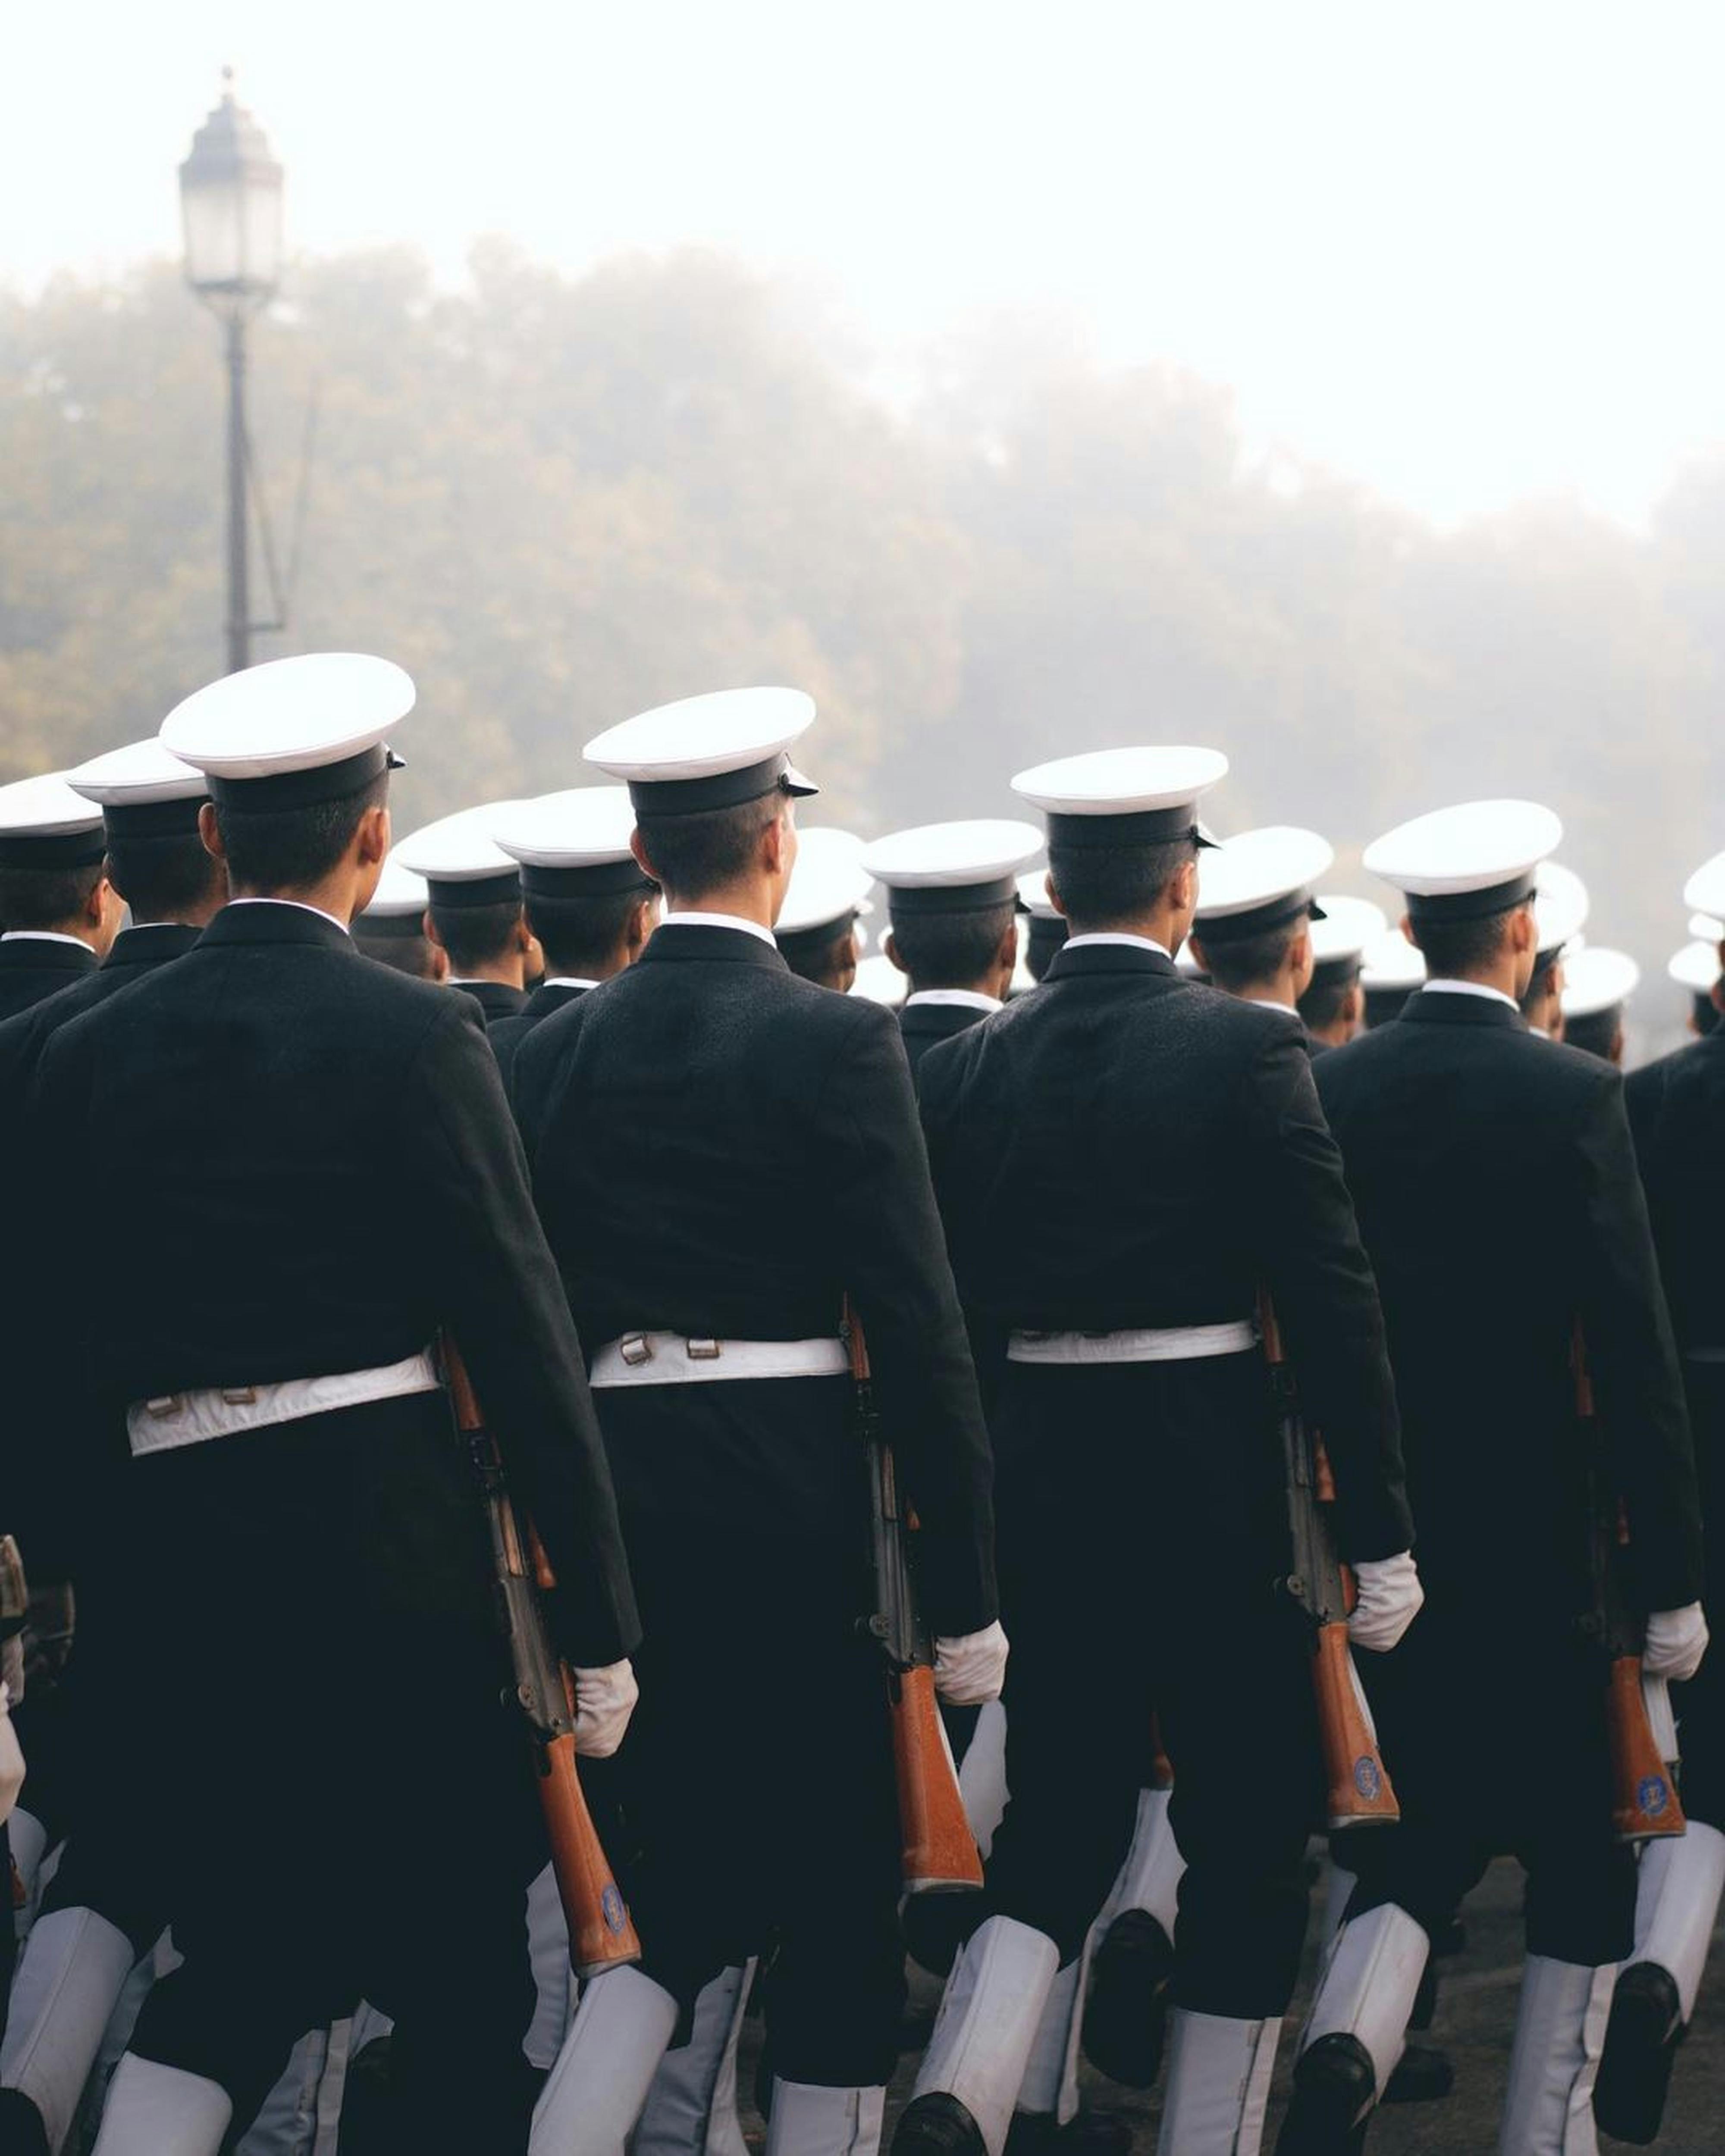 Soldiers Blue Dress Uniform Marching On Stock Photo 1354656314 |  Shutterstock